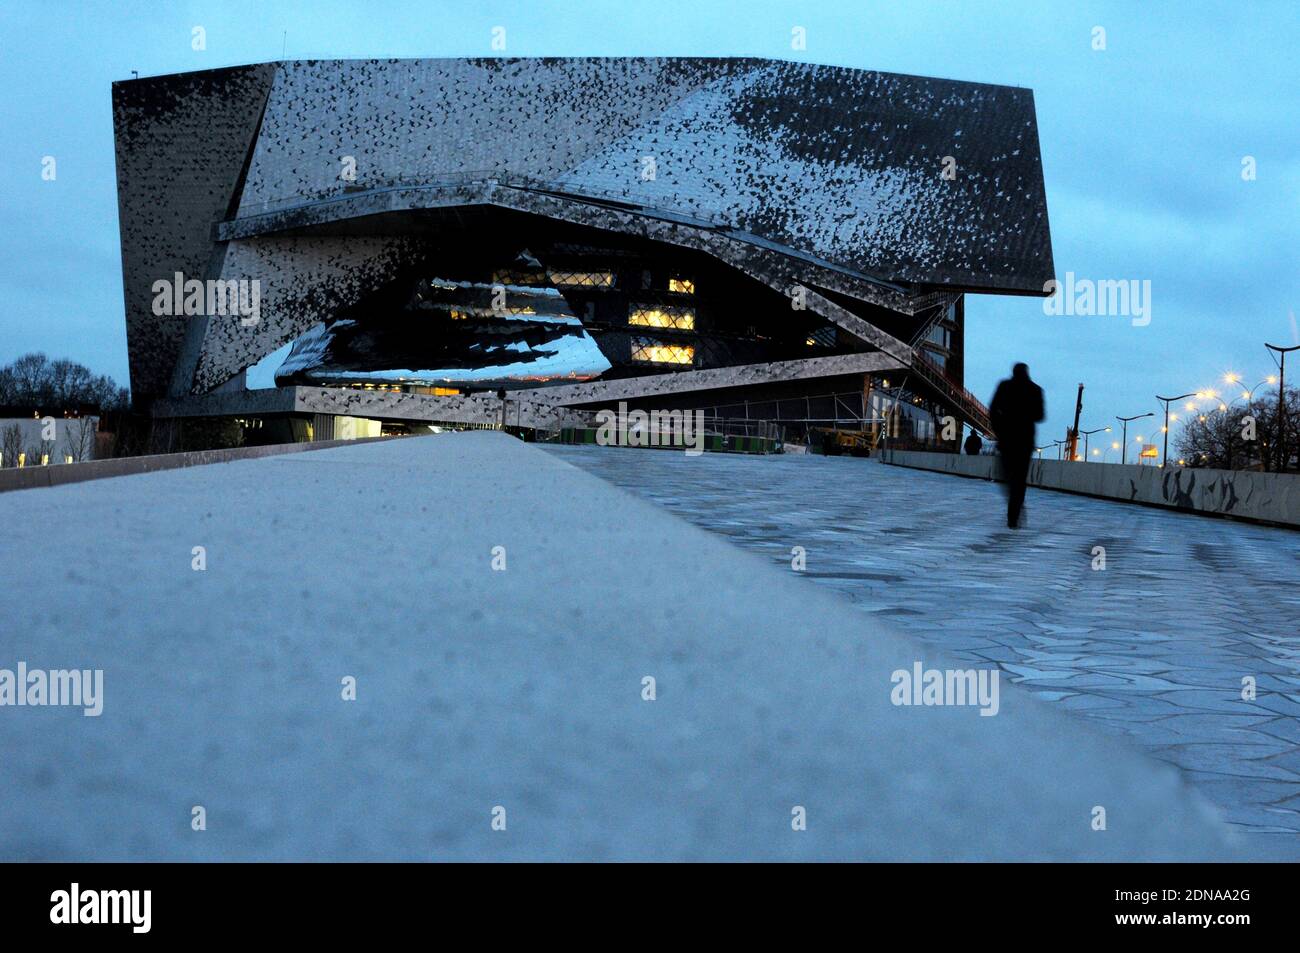 The new 'Philharmonie de Paris' in the Parc de la Villette, near Porte de Pantin in northeastern Paris, France on January 19, 2015. The Philharmonie, a multi-level concert complex designed by French architect Jean Nouvel whose main hall seats 2,400 on sweeping balconies surrounding the centre stage, took eight years and 386 million euros (455 million Dollars) of public money to build -- a budget three times its initial estimate. Photo by Alain Apaydin/ABACAPRESS.COM Stock Photo